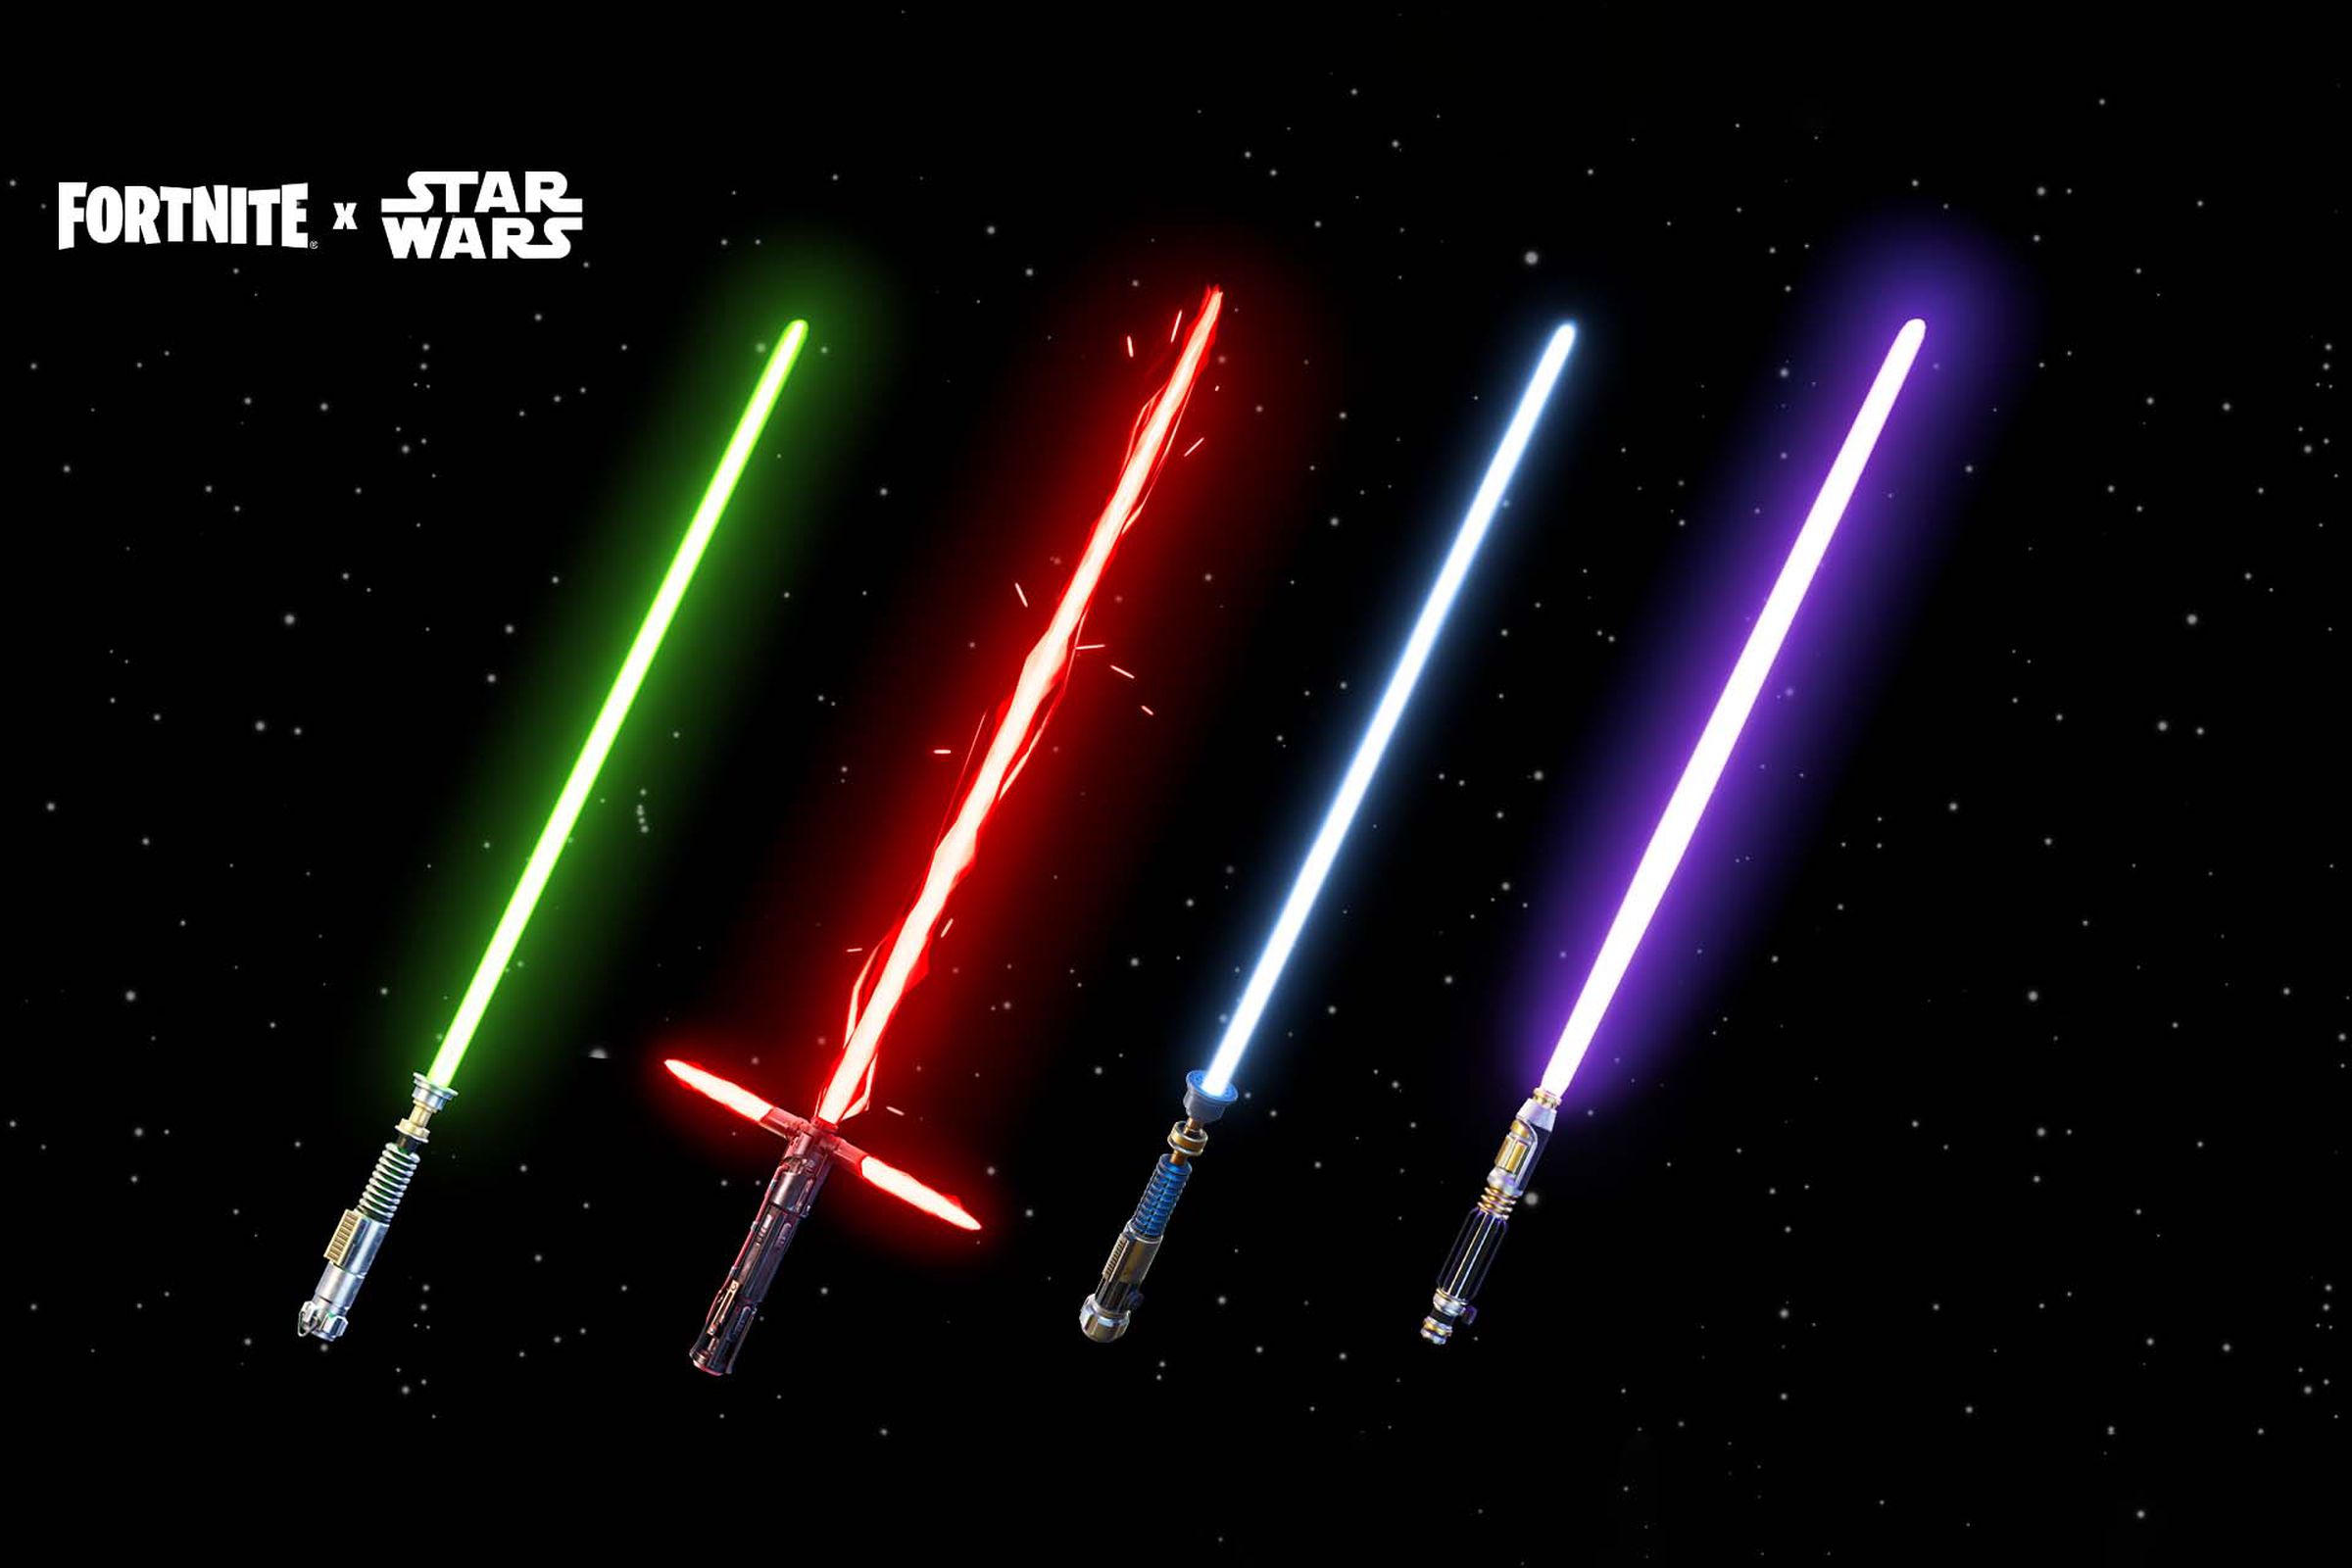 Four lightsabers from the franchise will be available.